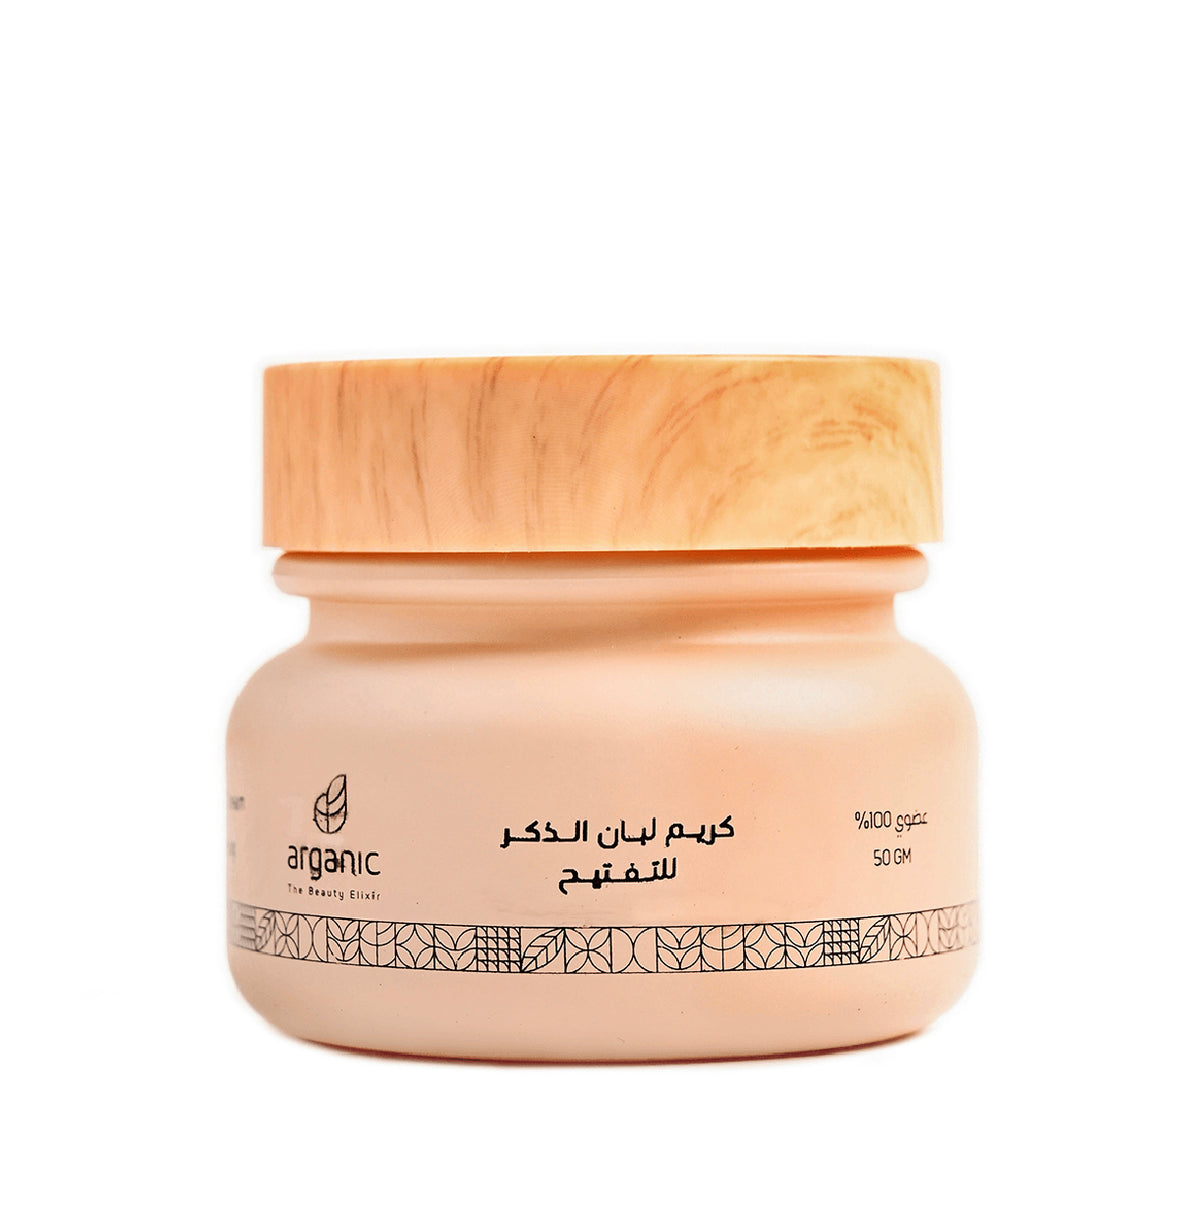 Organic hair cream jar with wooden cap, beige label isolated on white.